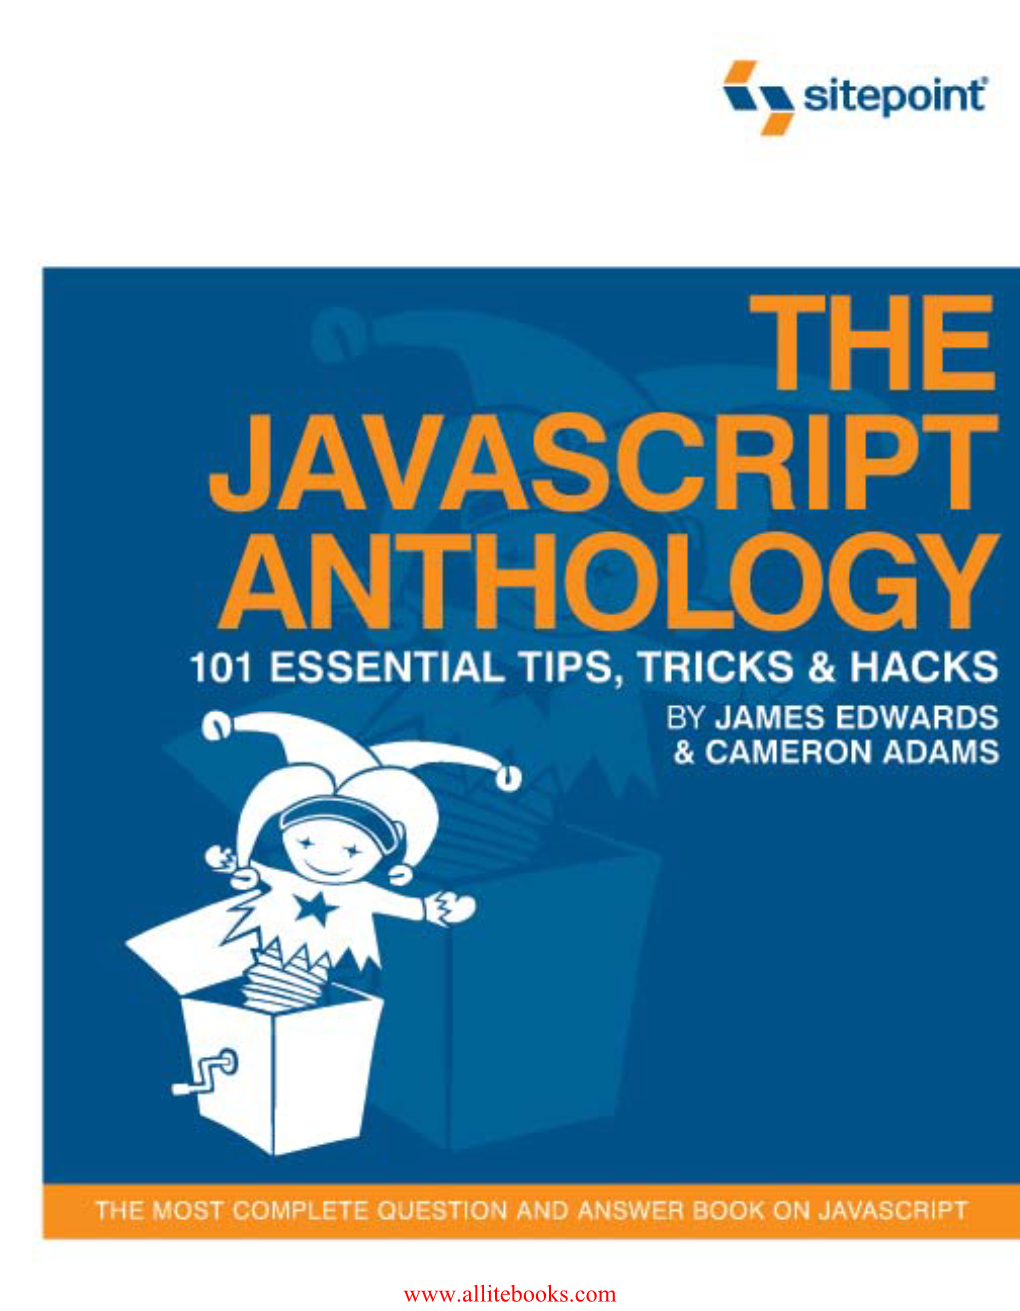 The Javascript Anthology 101 Essential Tips, Tricks & Hacks by James Edwards and Cameron Adams